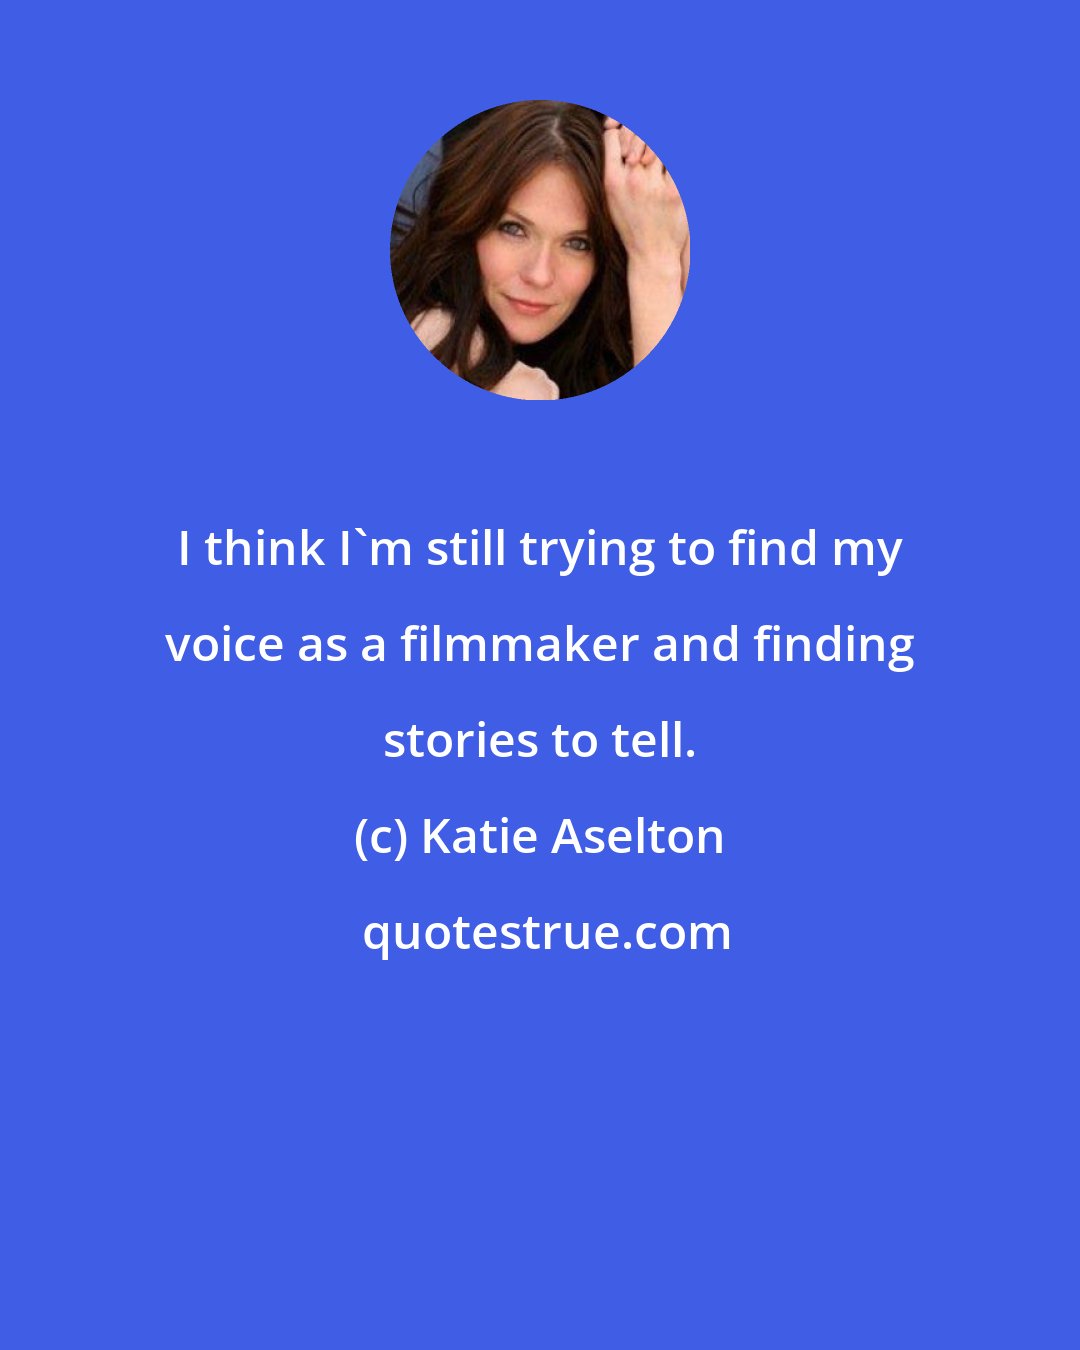 Katie Aselton: I think I'm still trying to find my voice as a filmmaker and finding stories to tell.